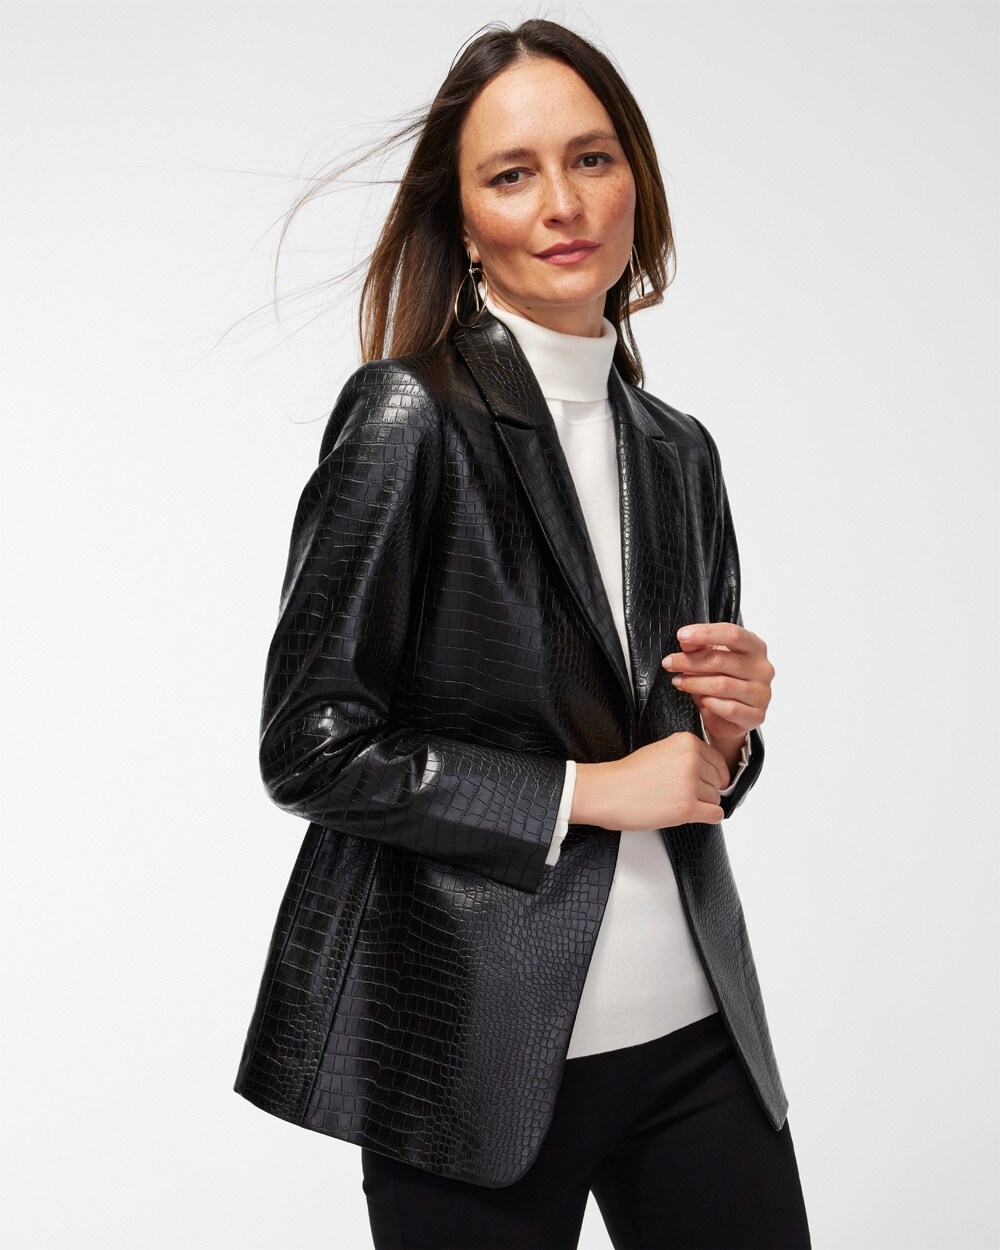 Crocodile Faux Leather Blazer video preview image, click to start video